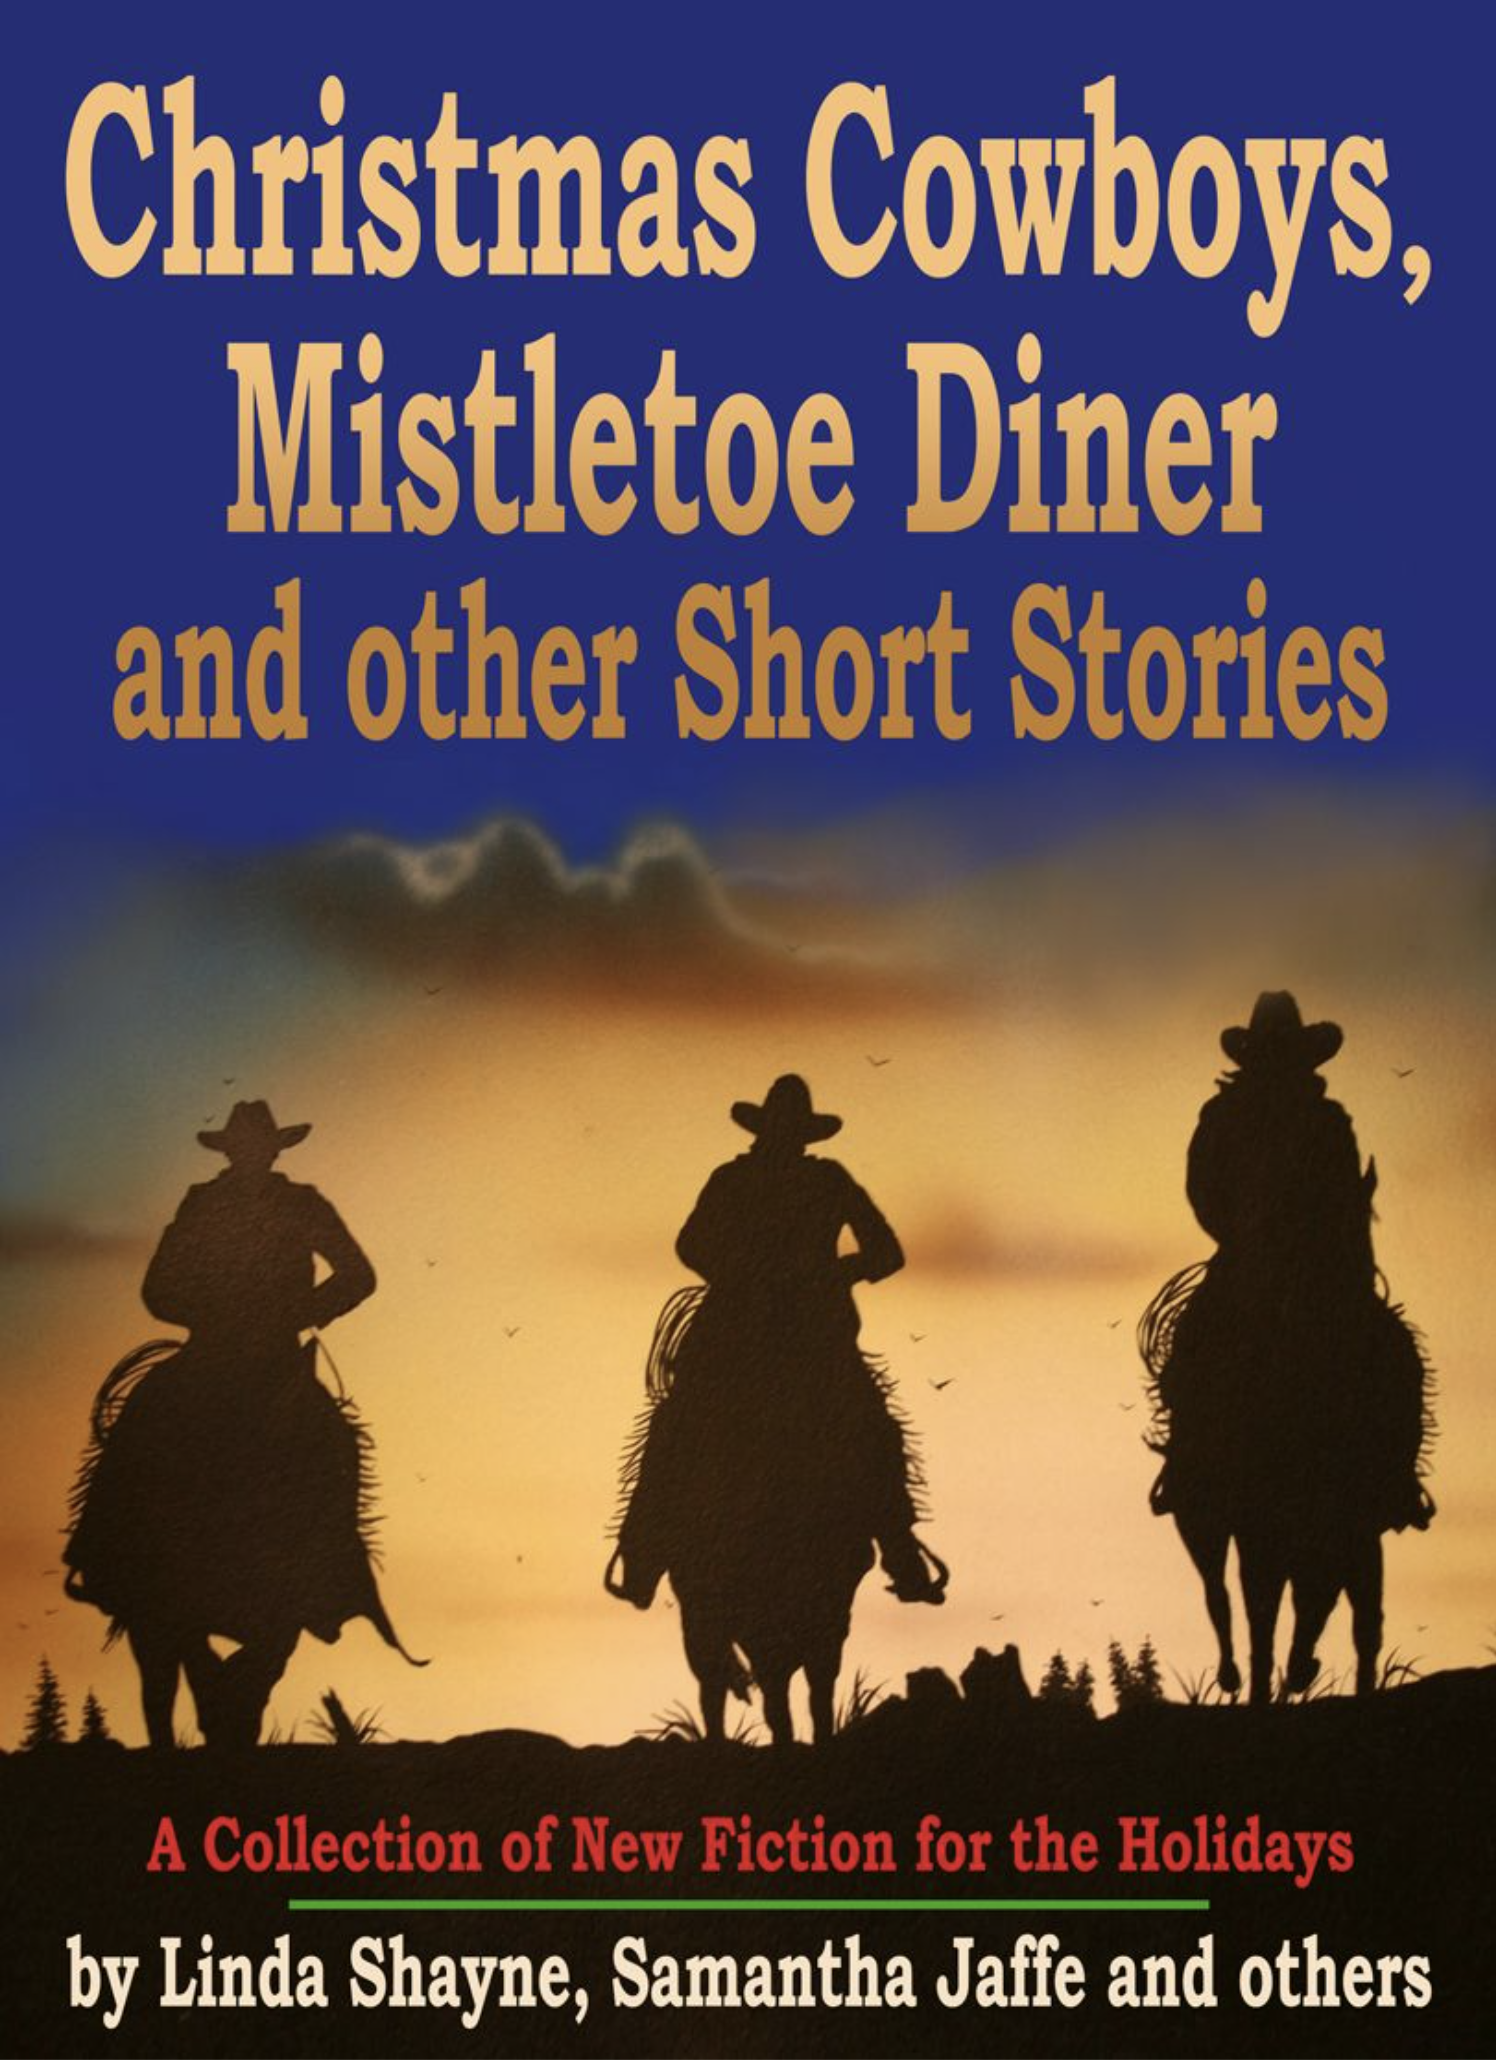 Christmas Cowboys, Mistletoe Diner and other Short Stories